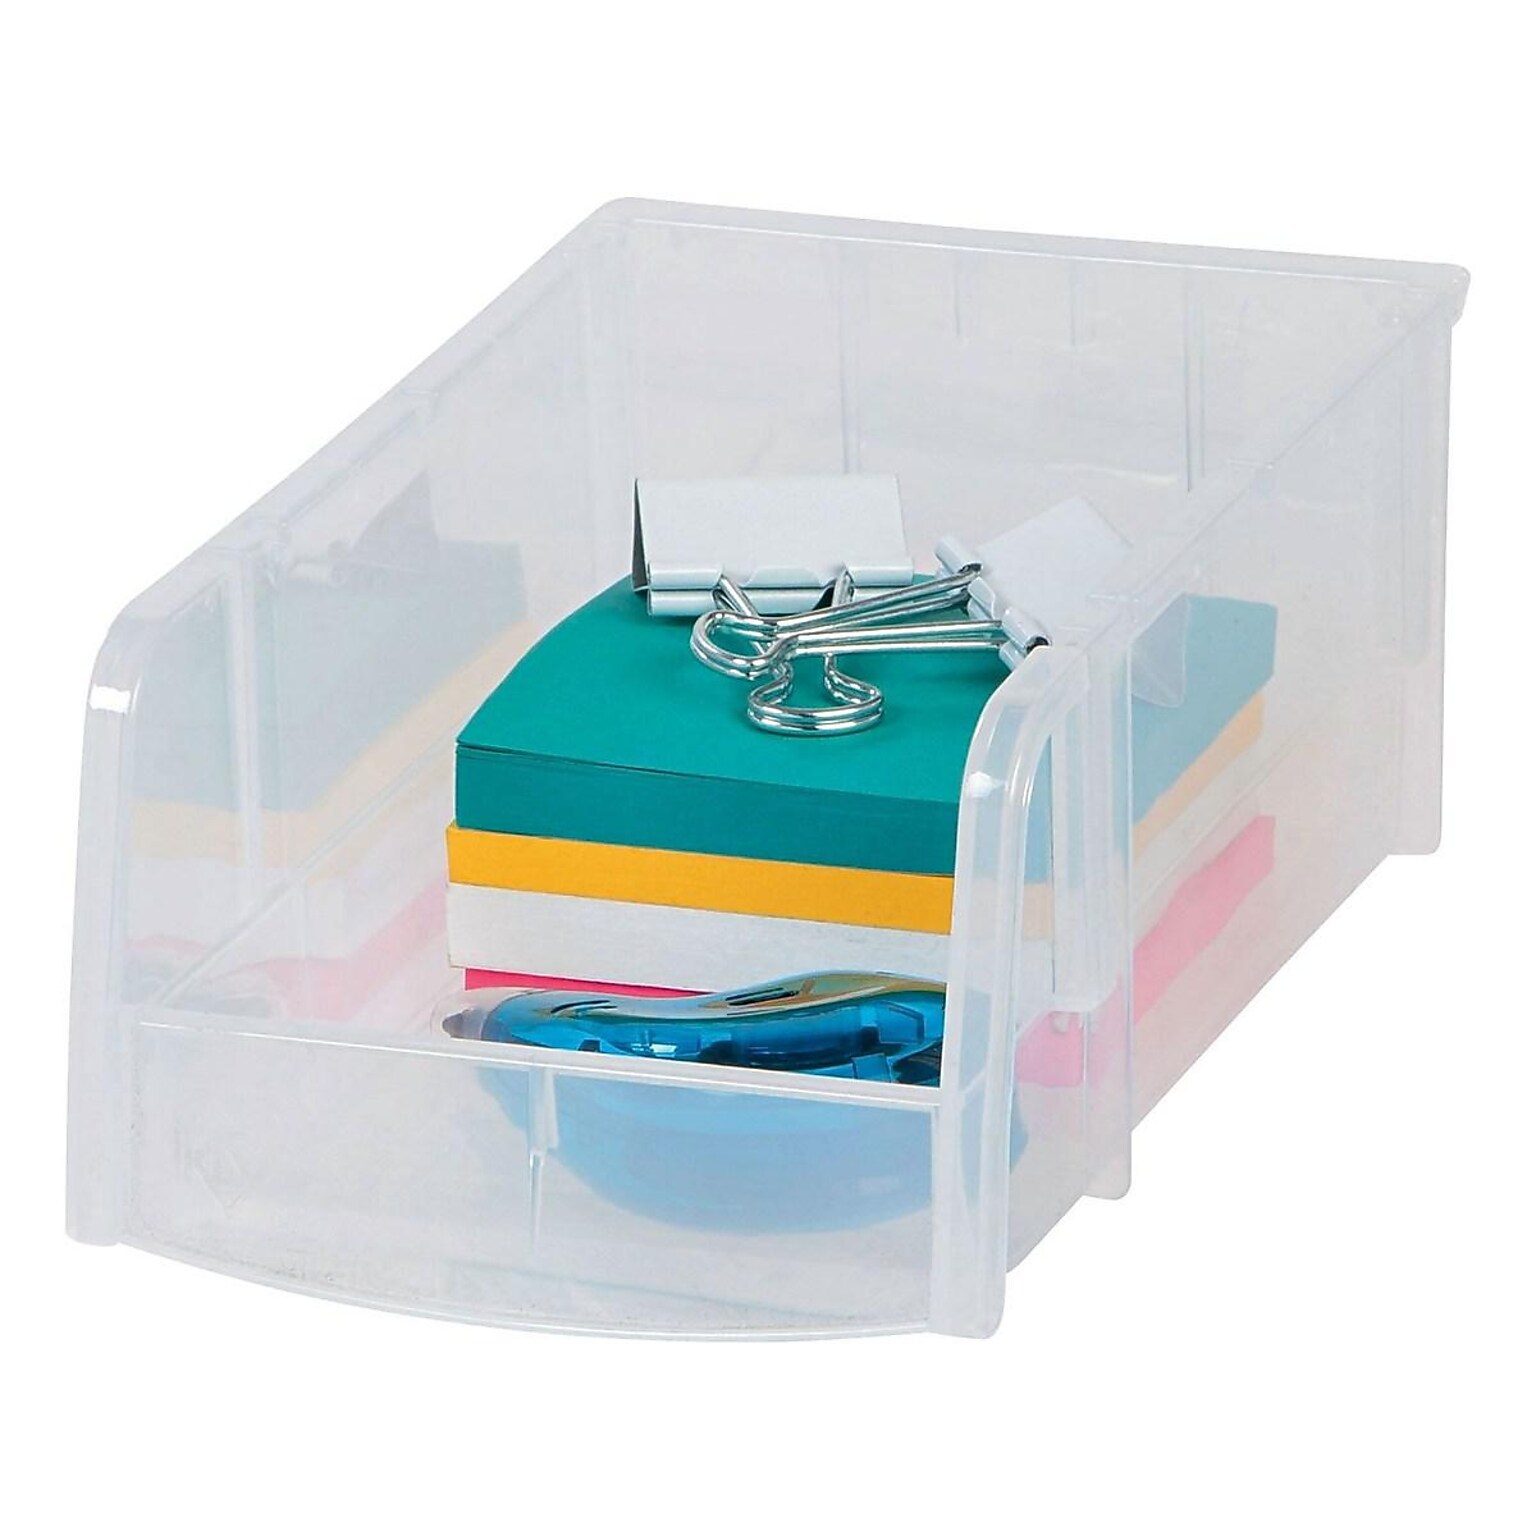 Small Modular Stacking Storage Box Open Lid, Clear (200518)